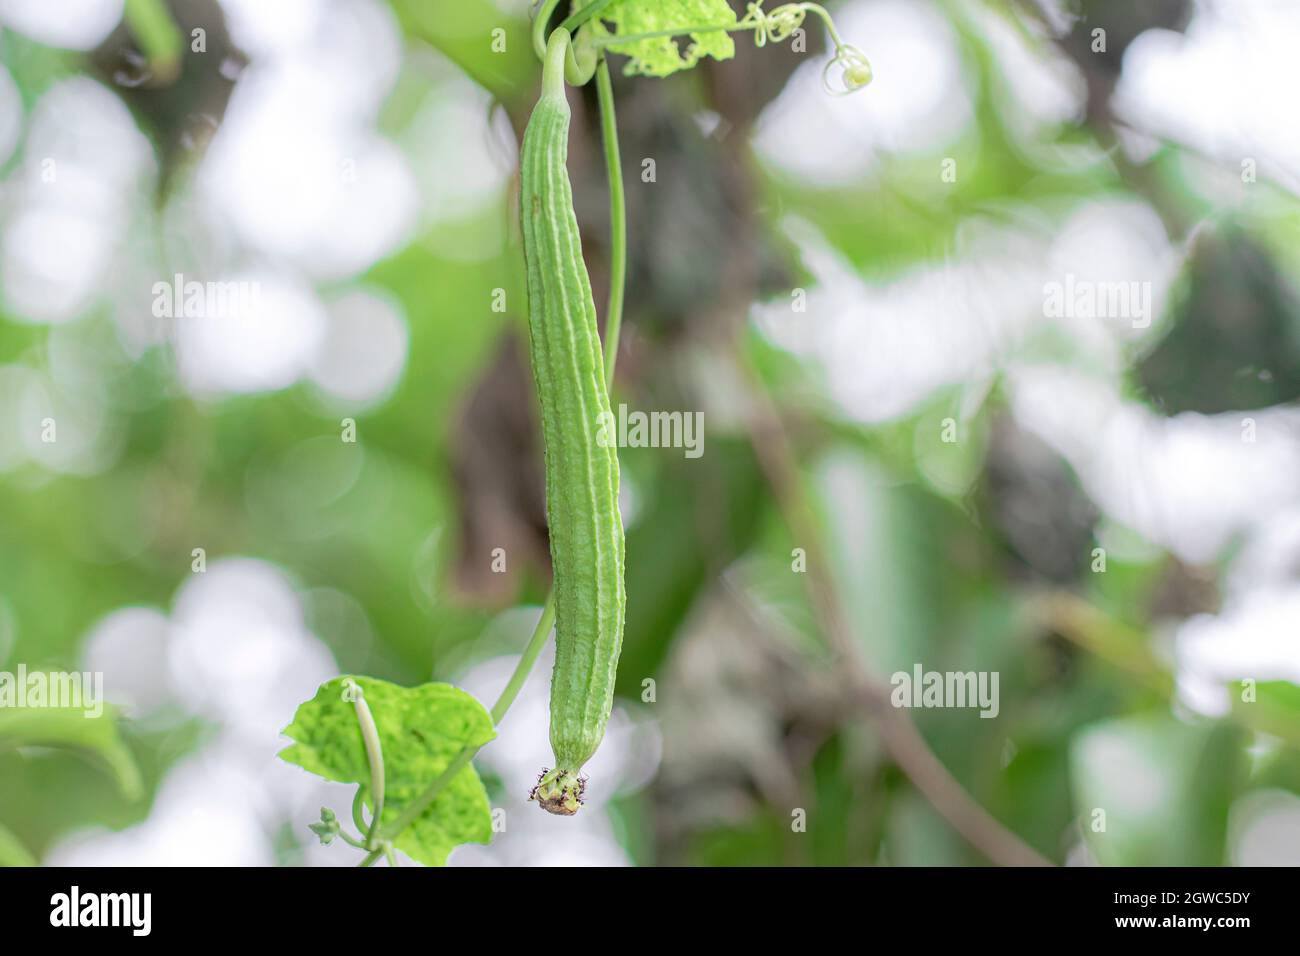 Close-up of Organic Healthy Hybrid Thai Variety Luffy fresh green fruit hanging from Luffa vine in Luffa home garden Stock Photo